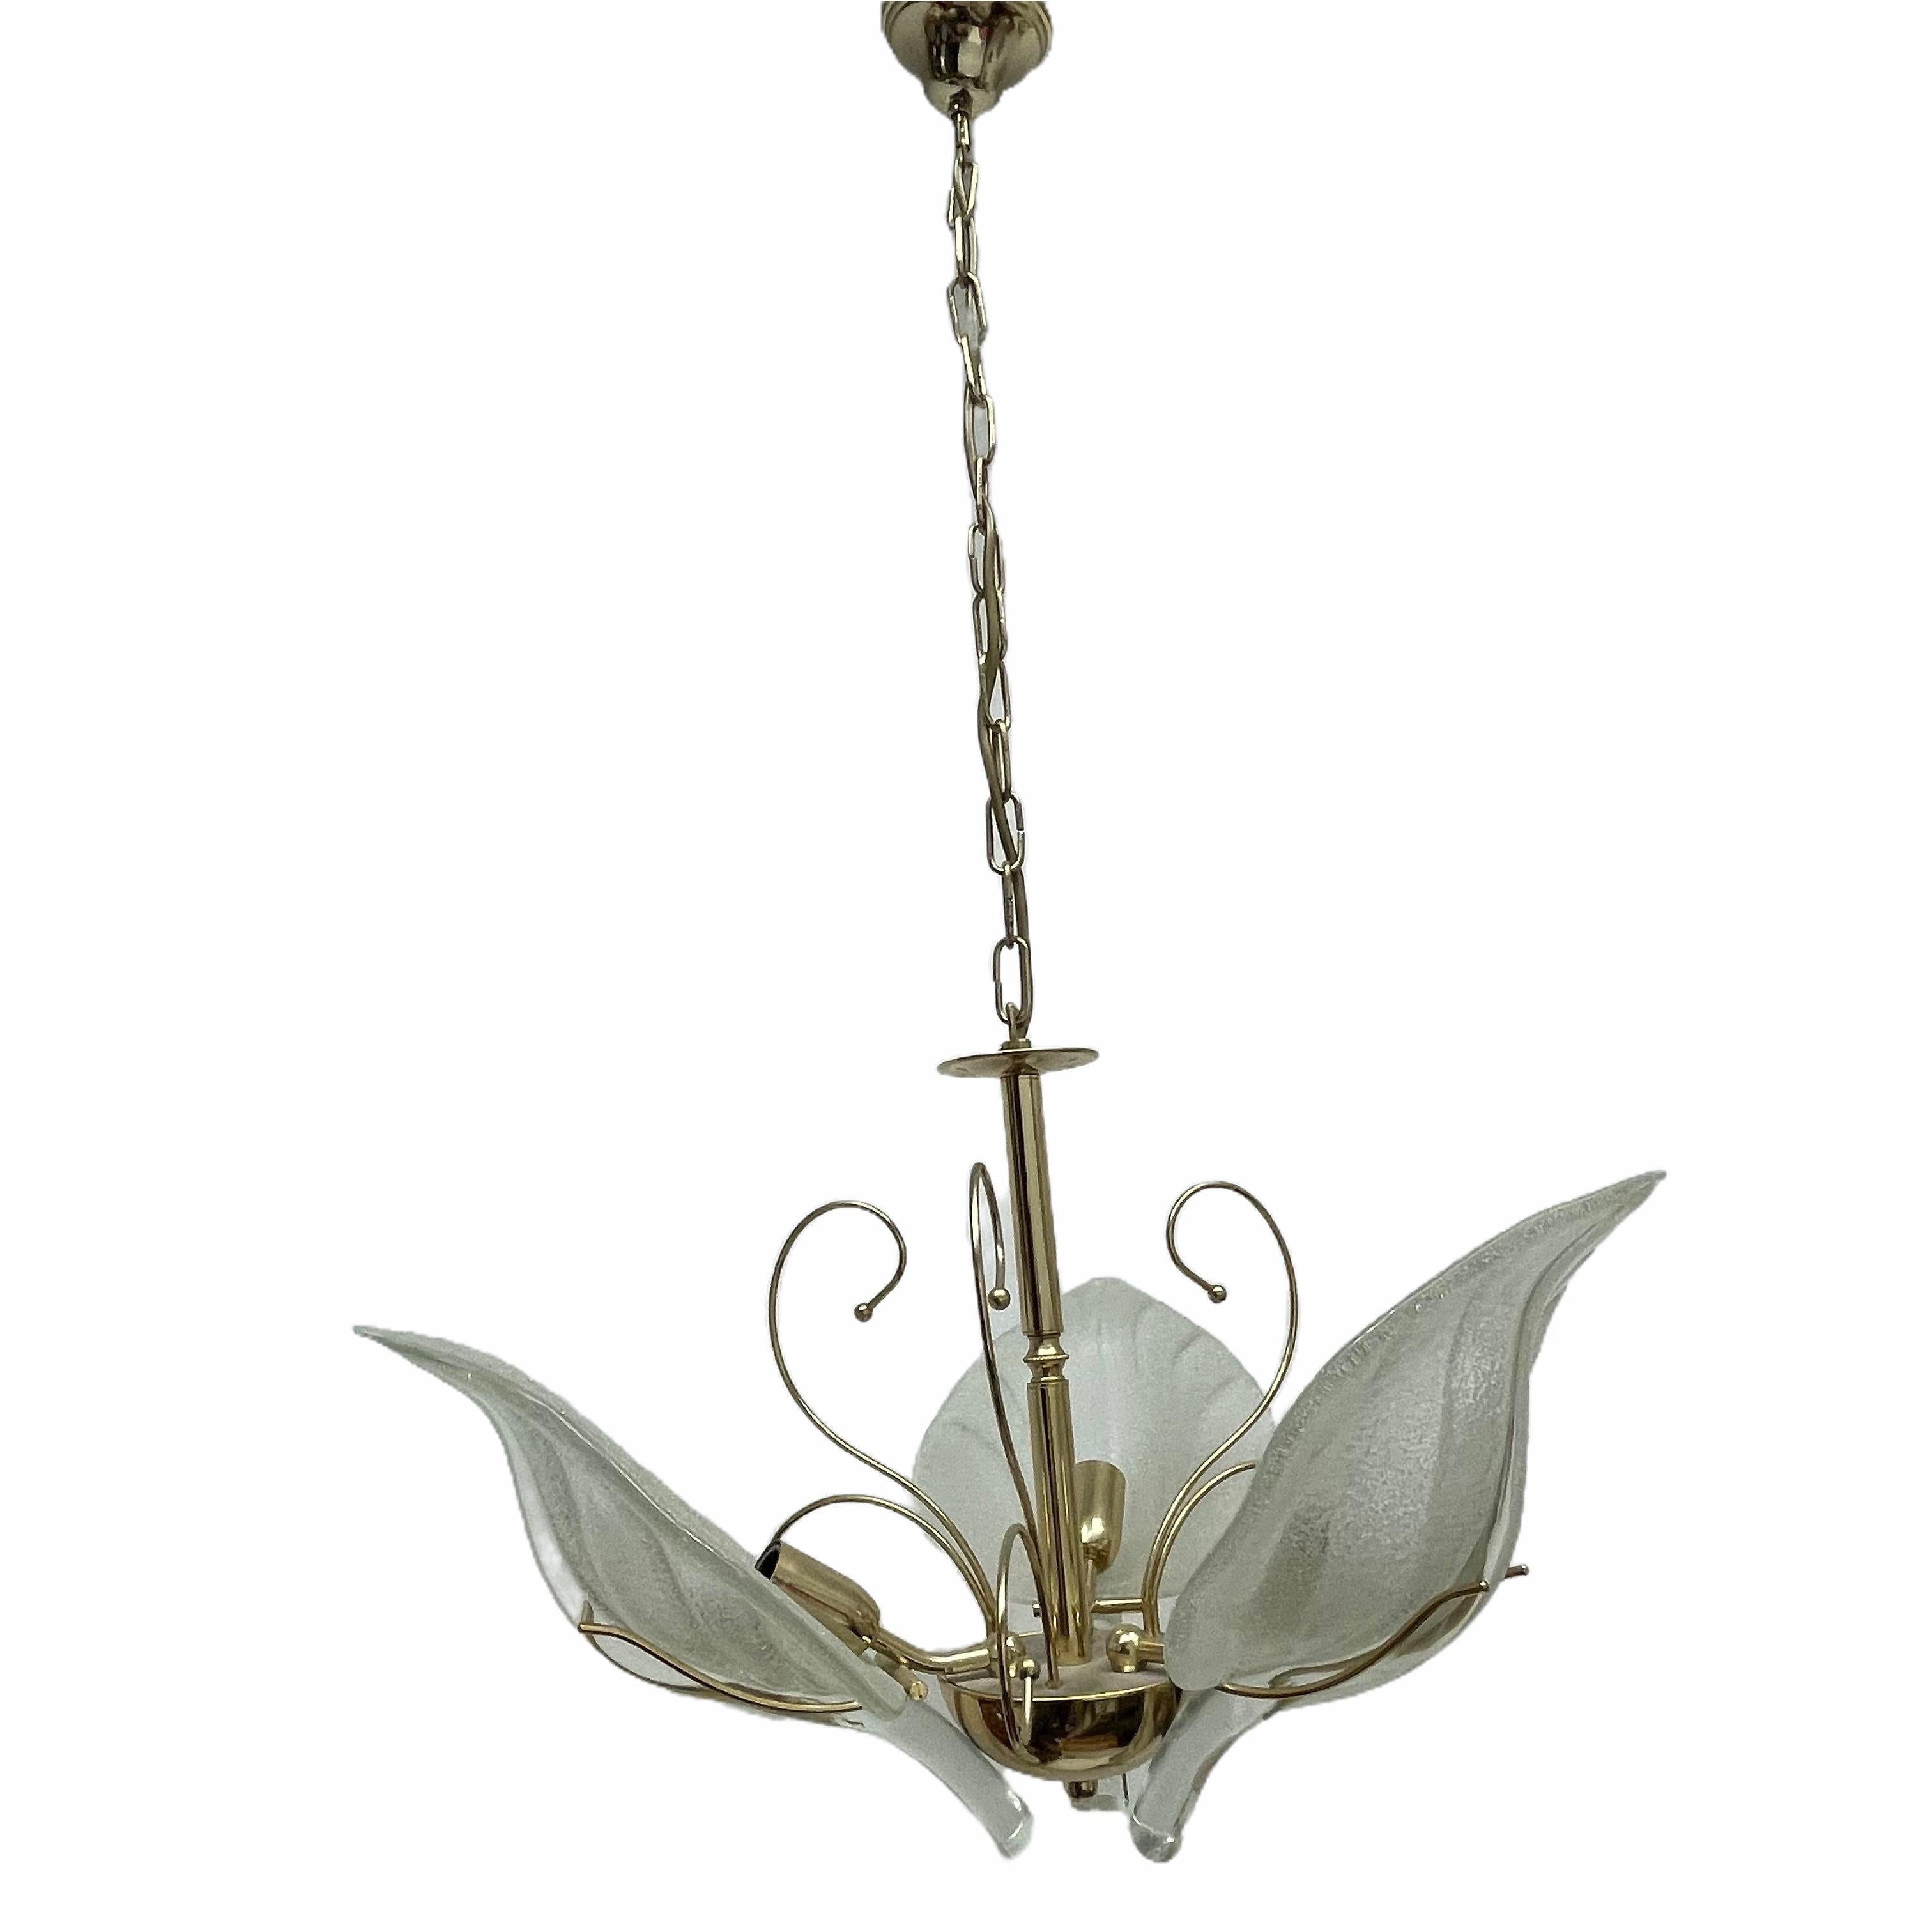 Beautiful and rare chandelier or pendant light by Massive Leuchten, Germany. An original vintage piece manufactured in the 1960s. It is made of metal and three heavy blown Murano glass leafs. The Fixture requires 3 European E14 / 110 Volt Candelabra